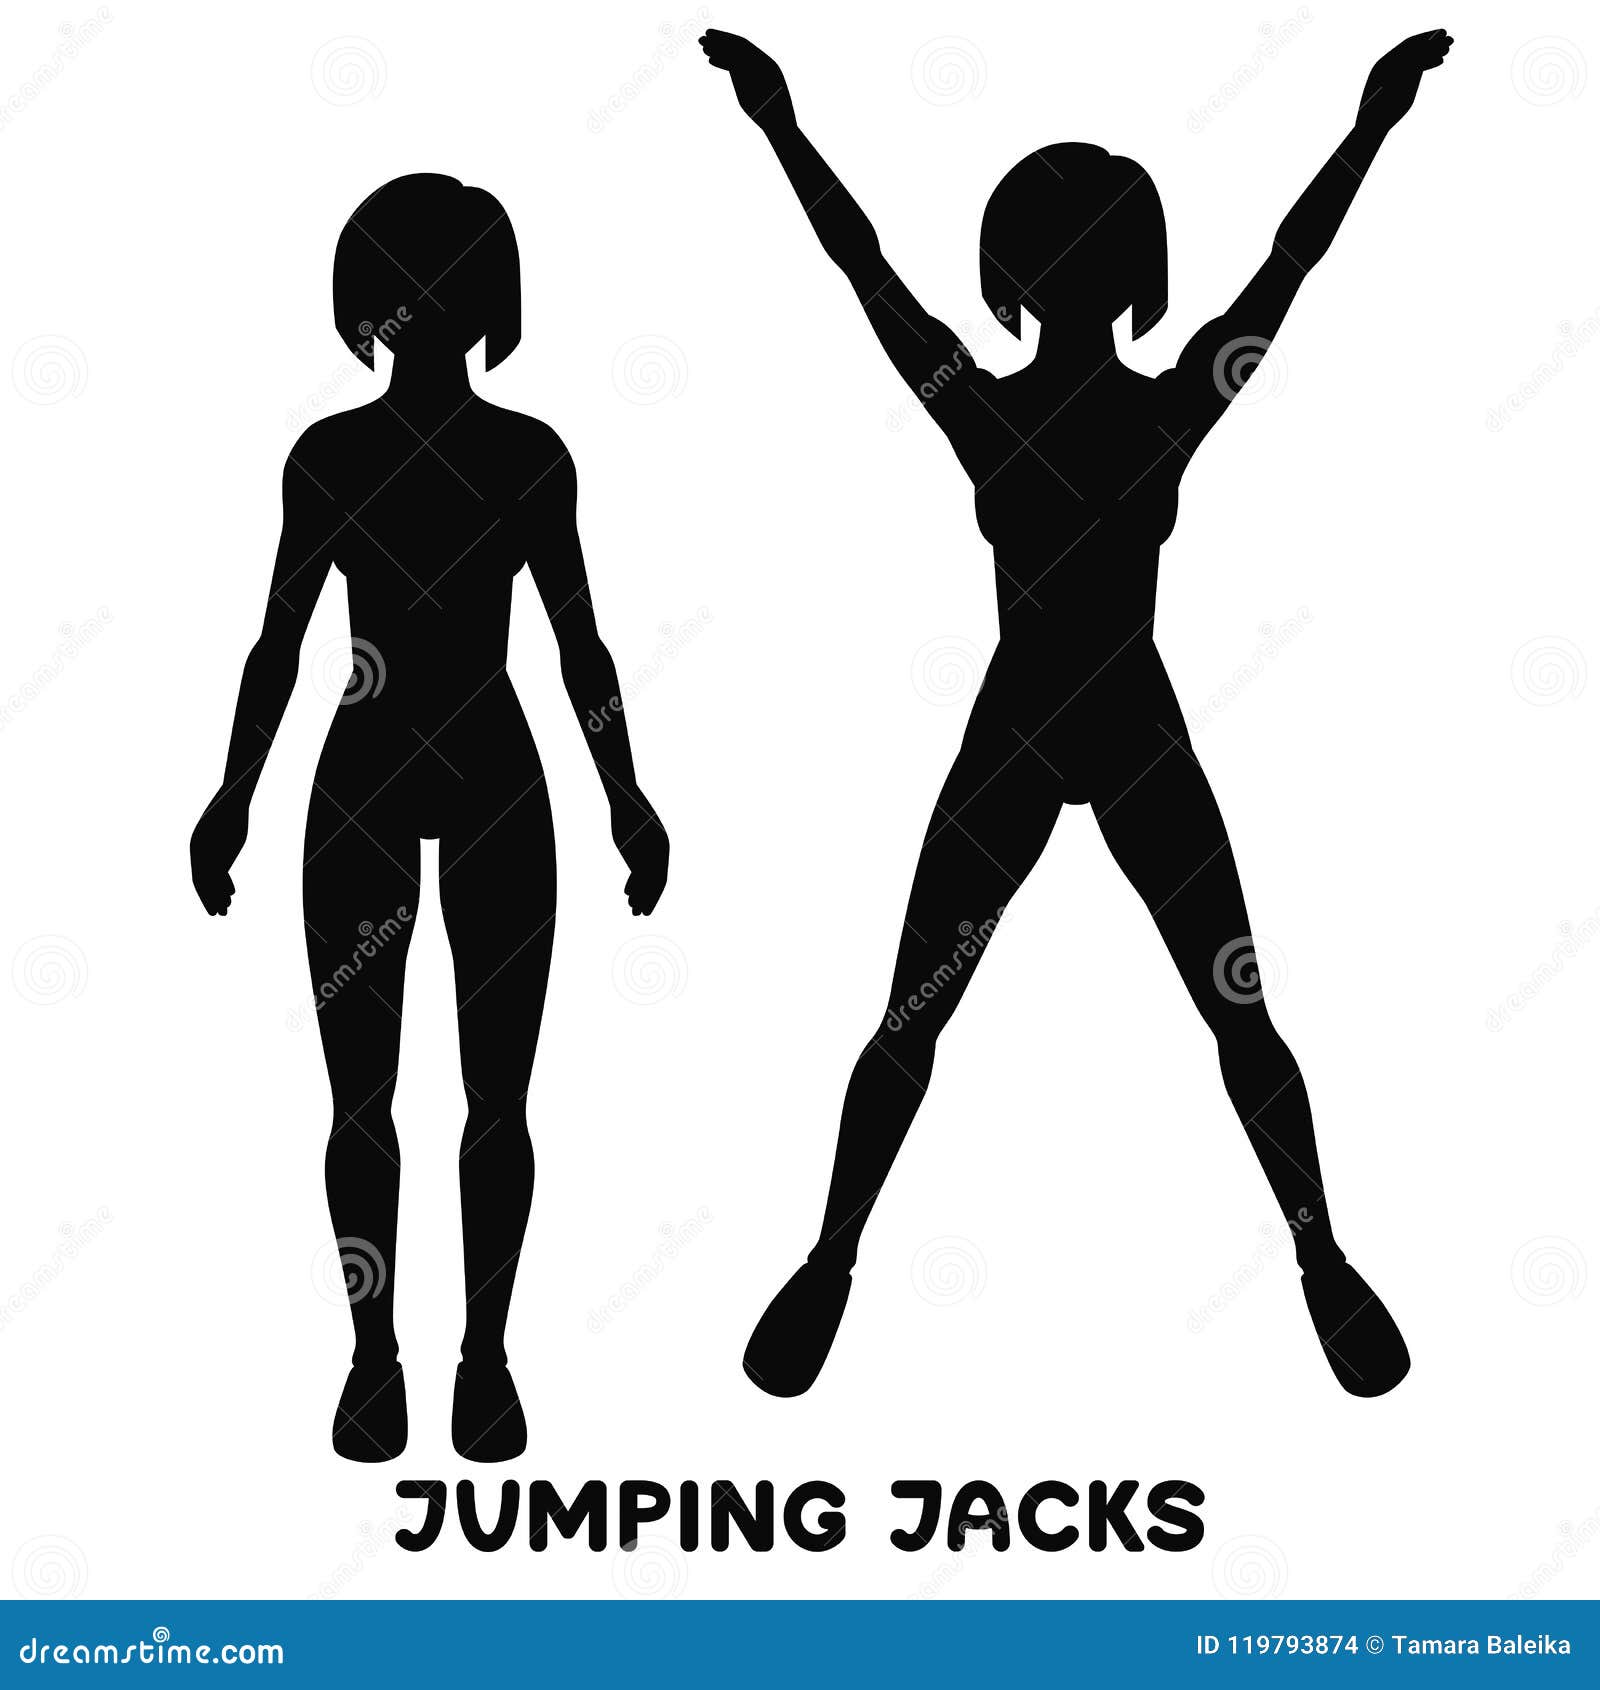 jumping jack. sport exersice. silhouettes of woman doing exercise. workout, training.